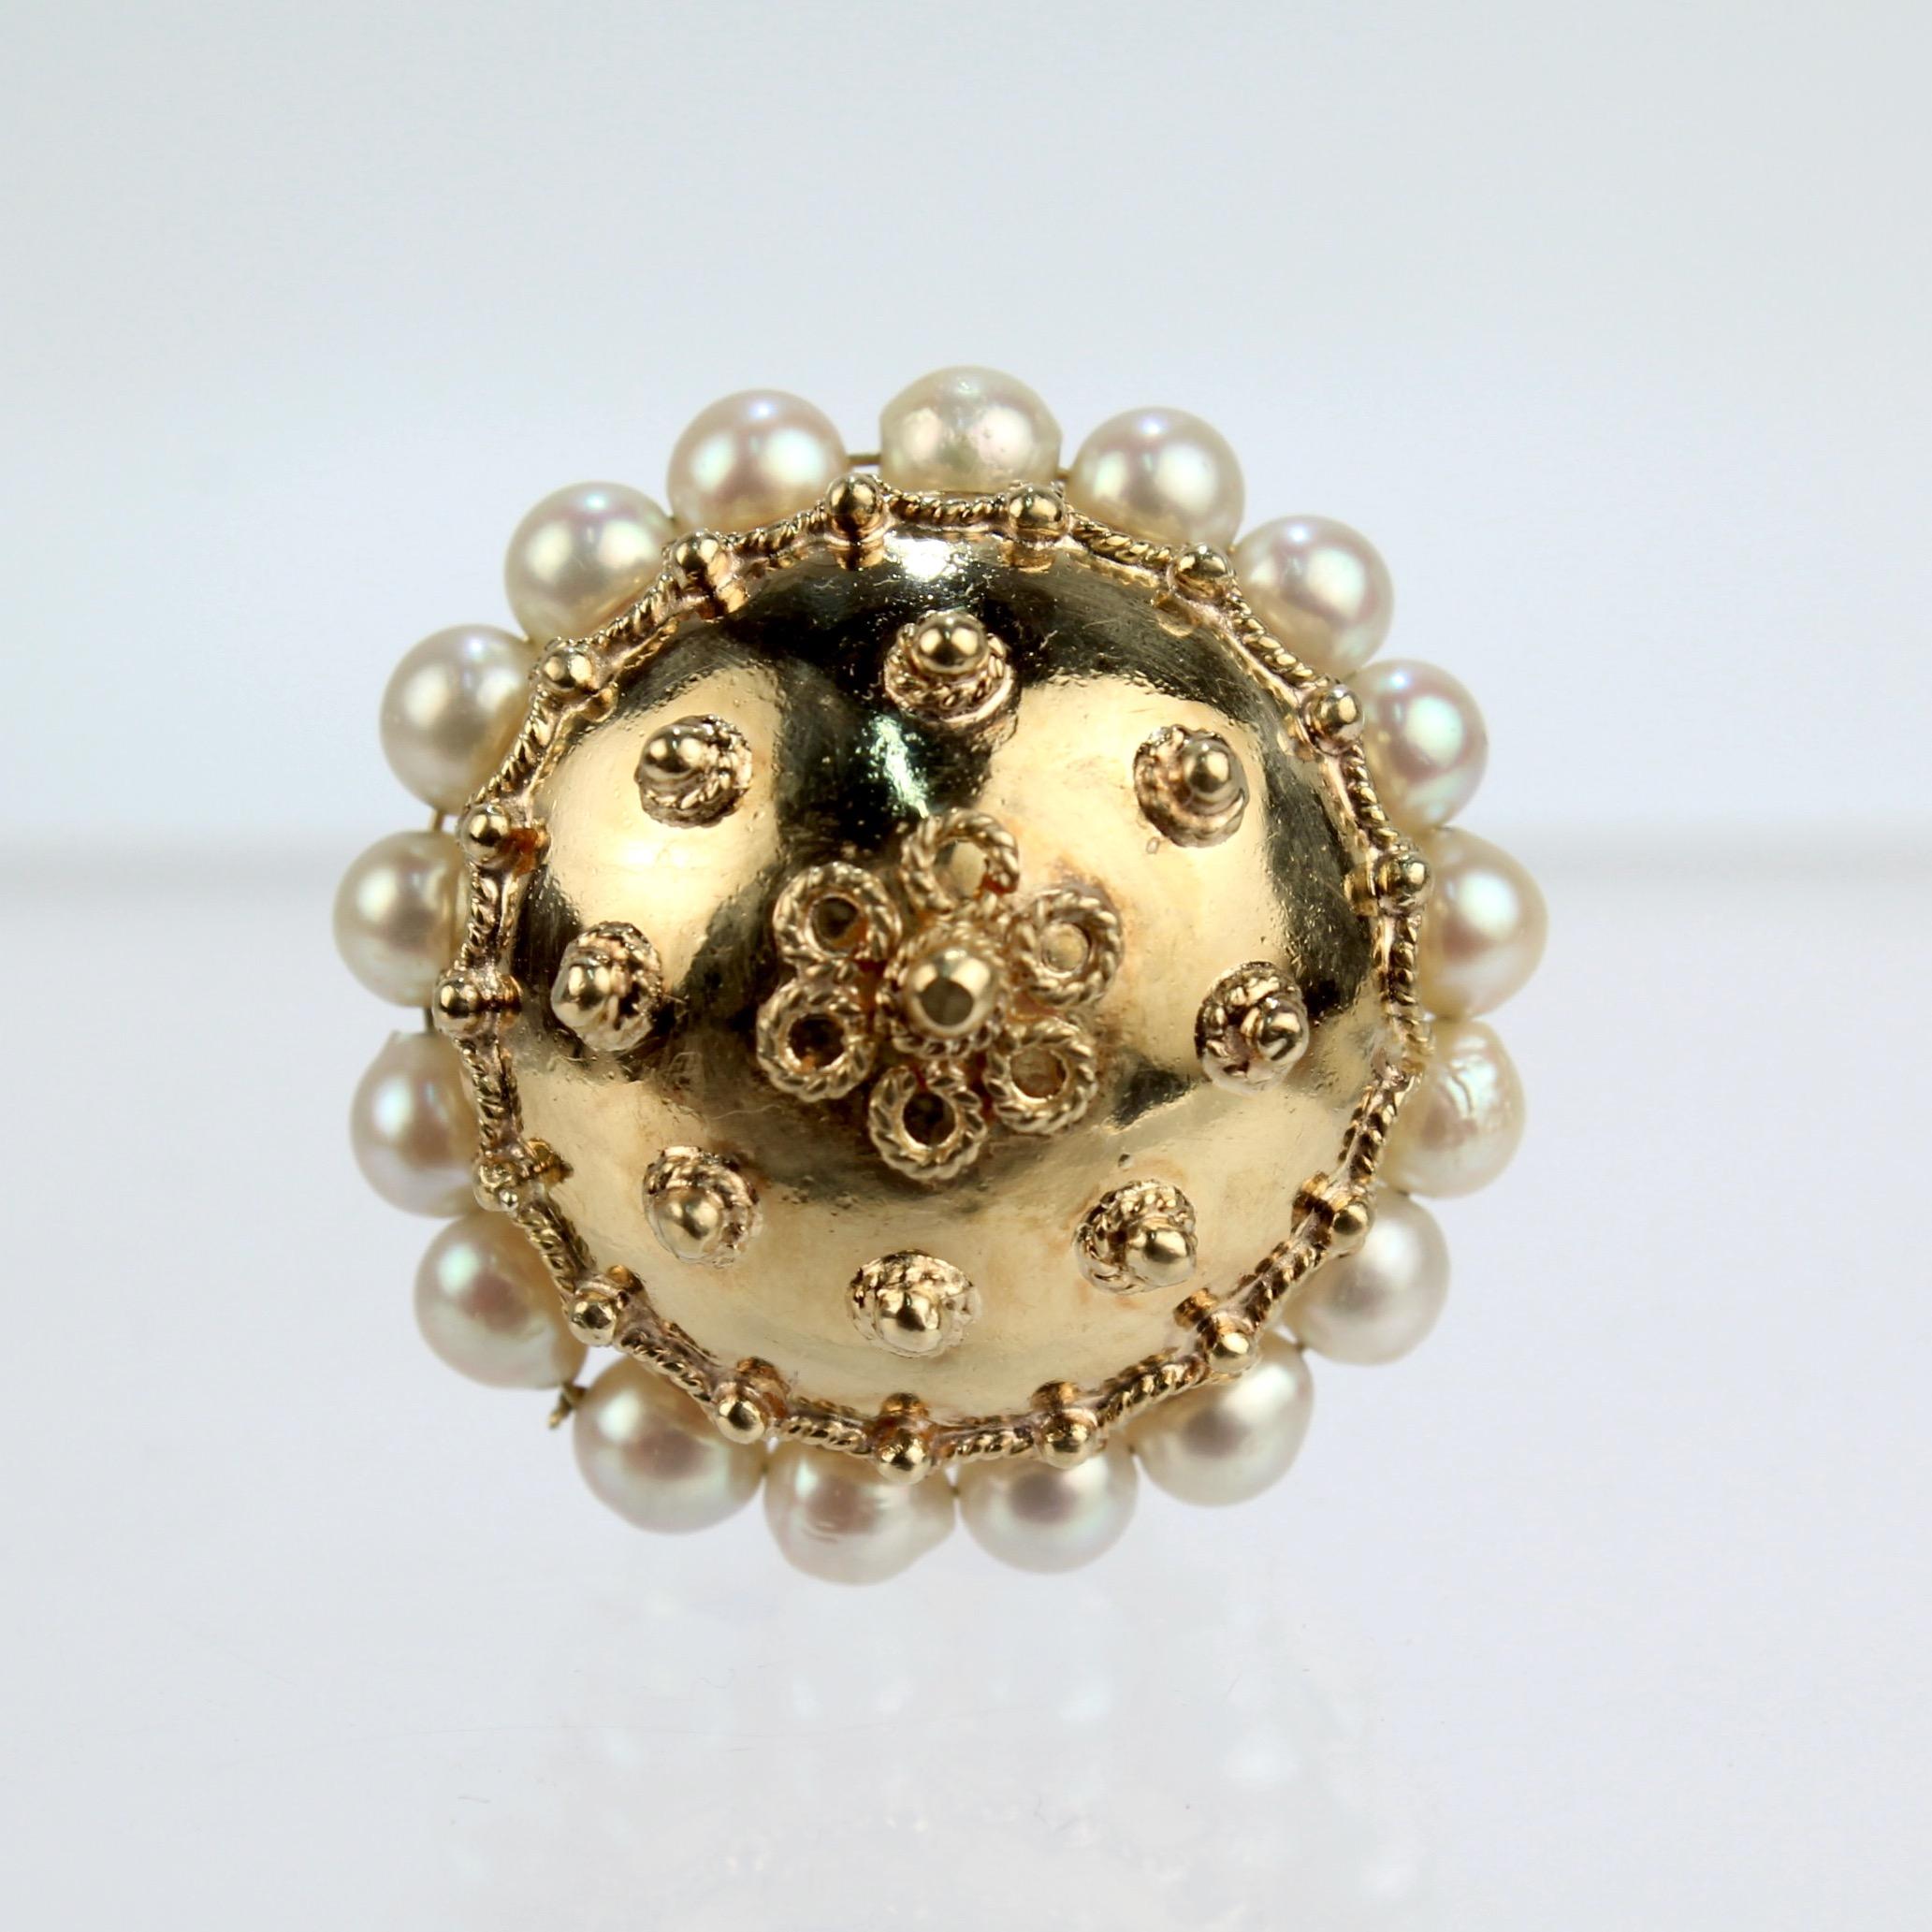 Etruscan Revival 18 Karat Gold, Amethyst, and Pearl Charm or Pendant at ...